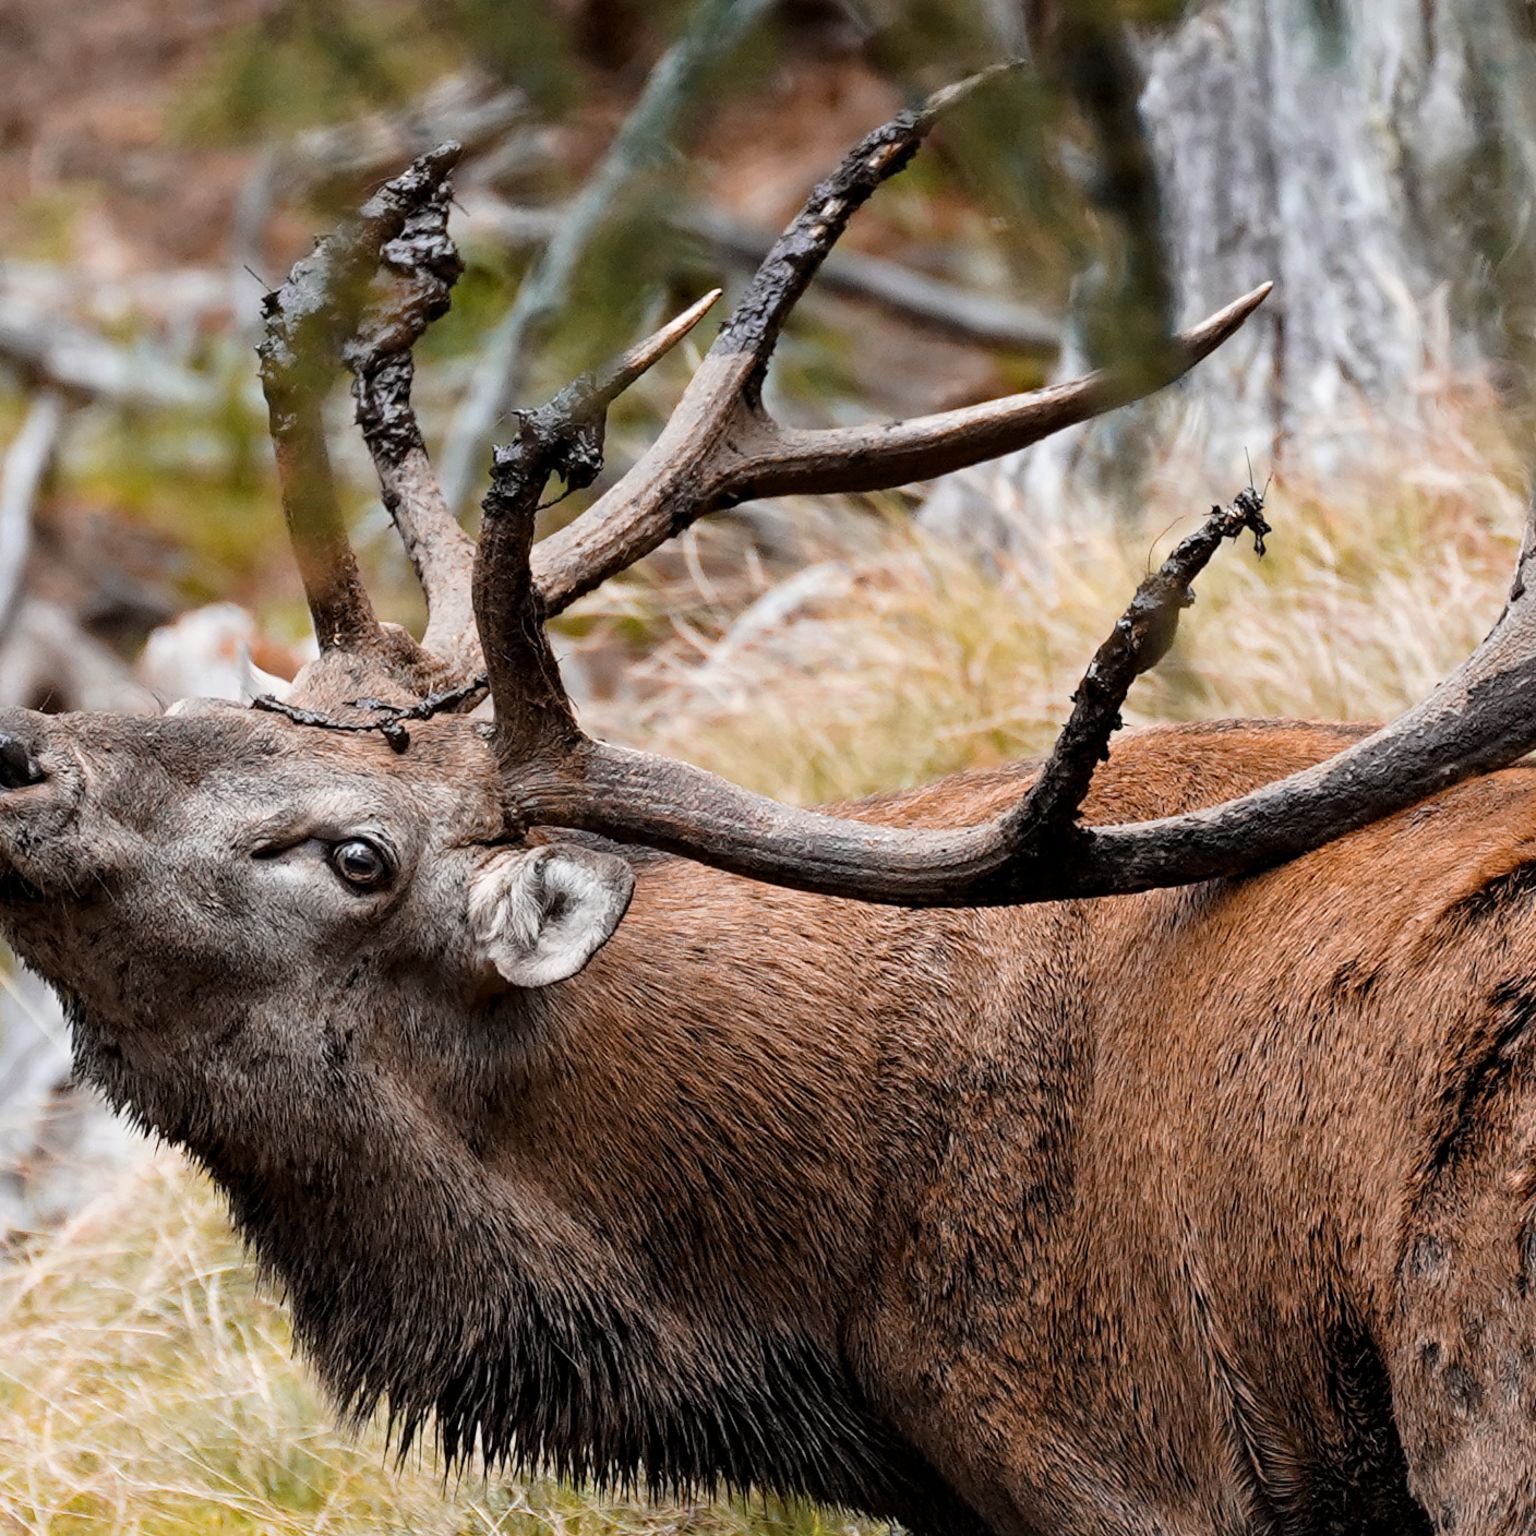 A roaring stag photographed by Marcel Grichting. It is most exciting in autumn, when the stags are in rut, says Grichting, Valais, Switzerland.